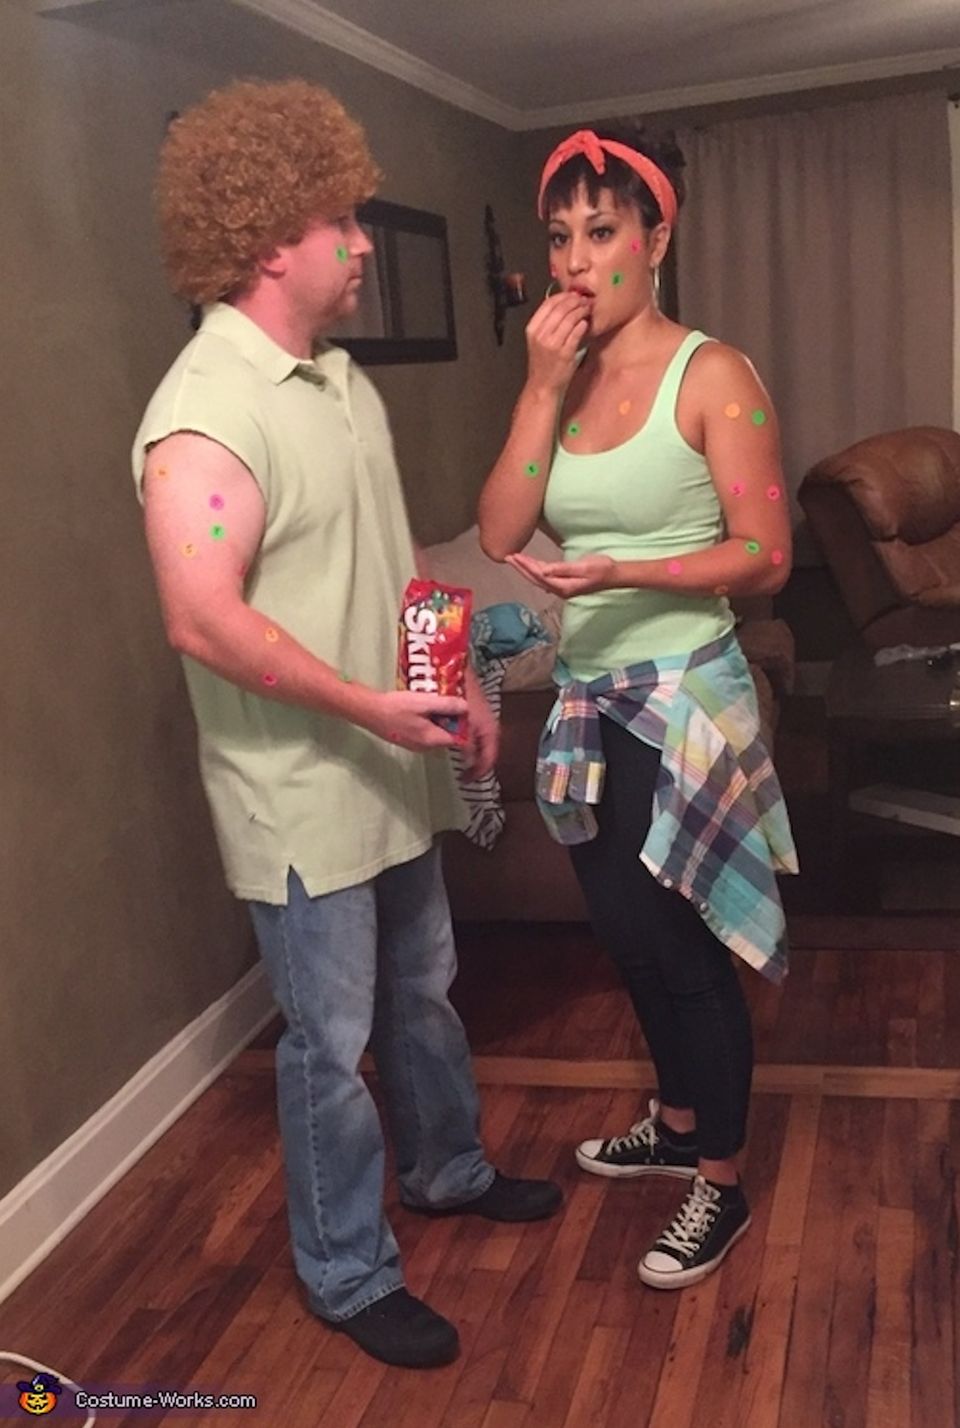 Get Diy Halloween Costumes Ideas For Couples Gif